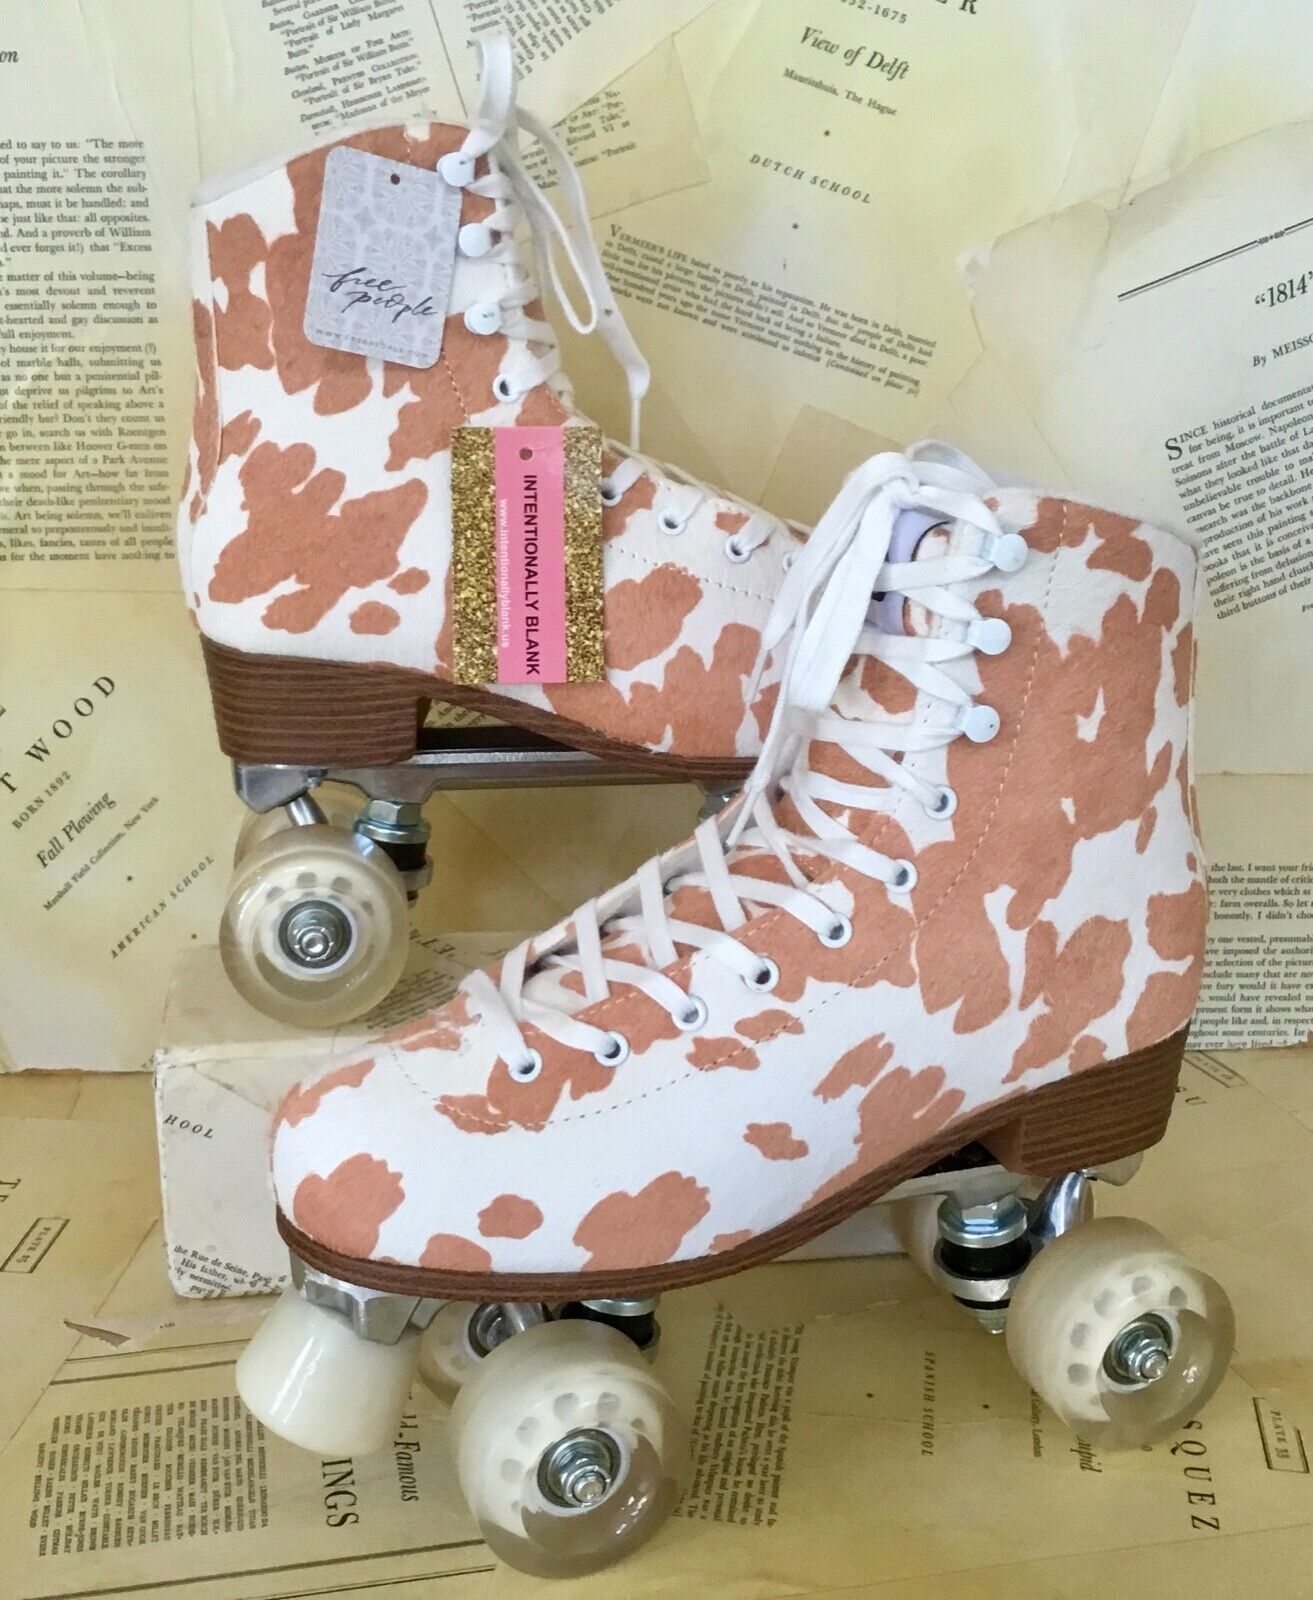 Free People Intentionally Blank Roller Rink Skates Taupe Moo Calf Hair 40/9 Nwt